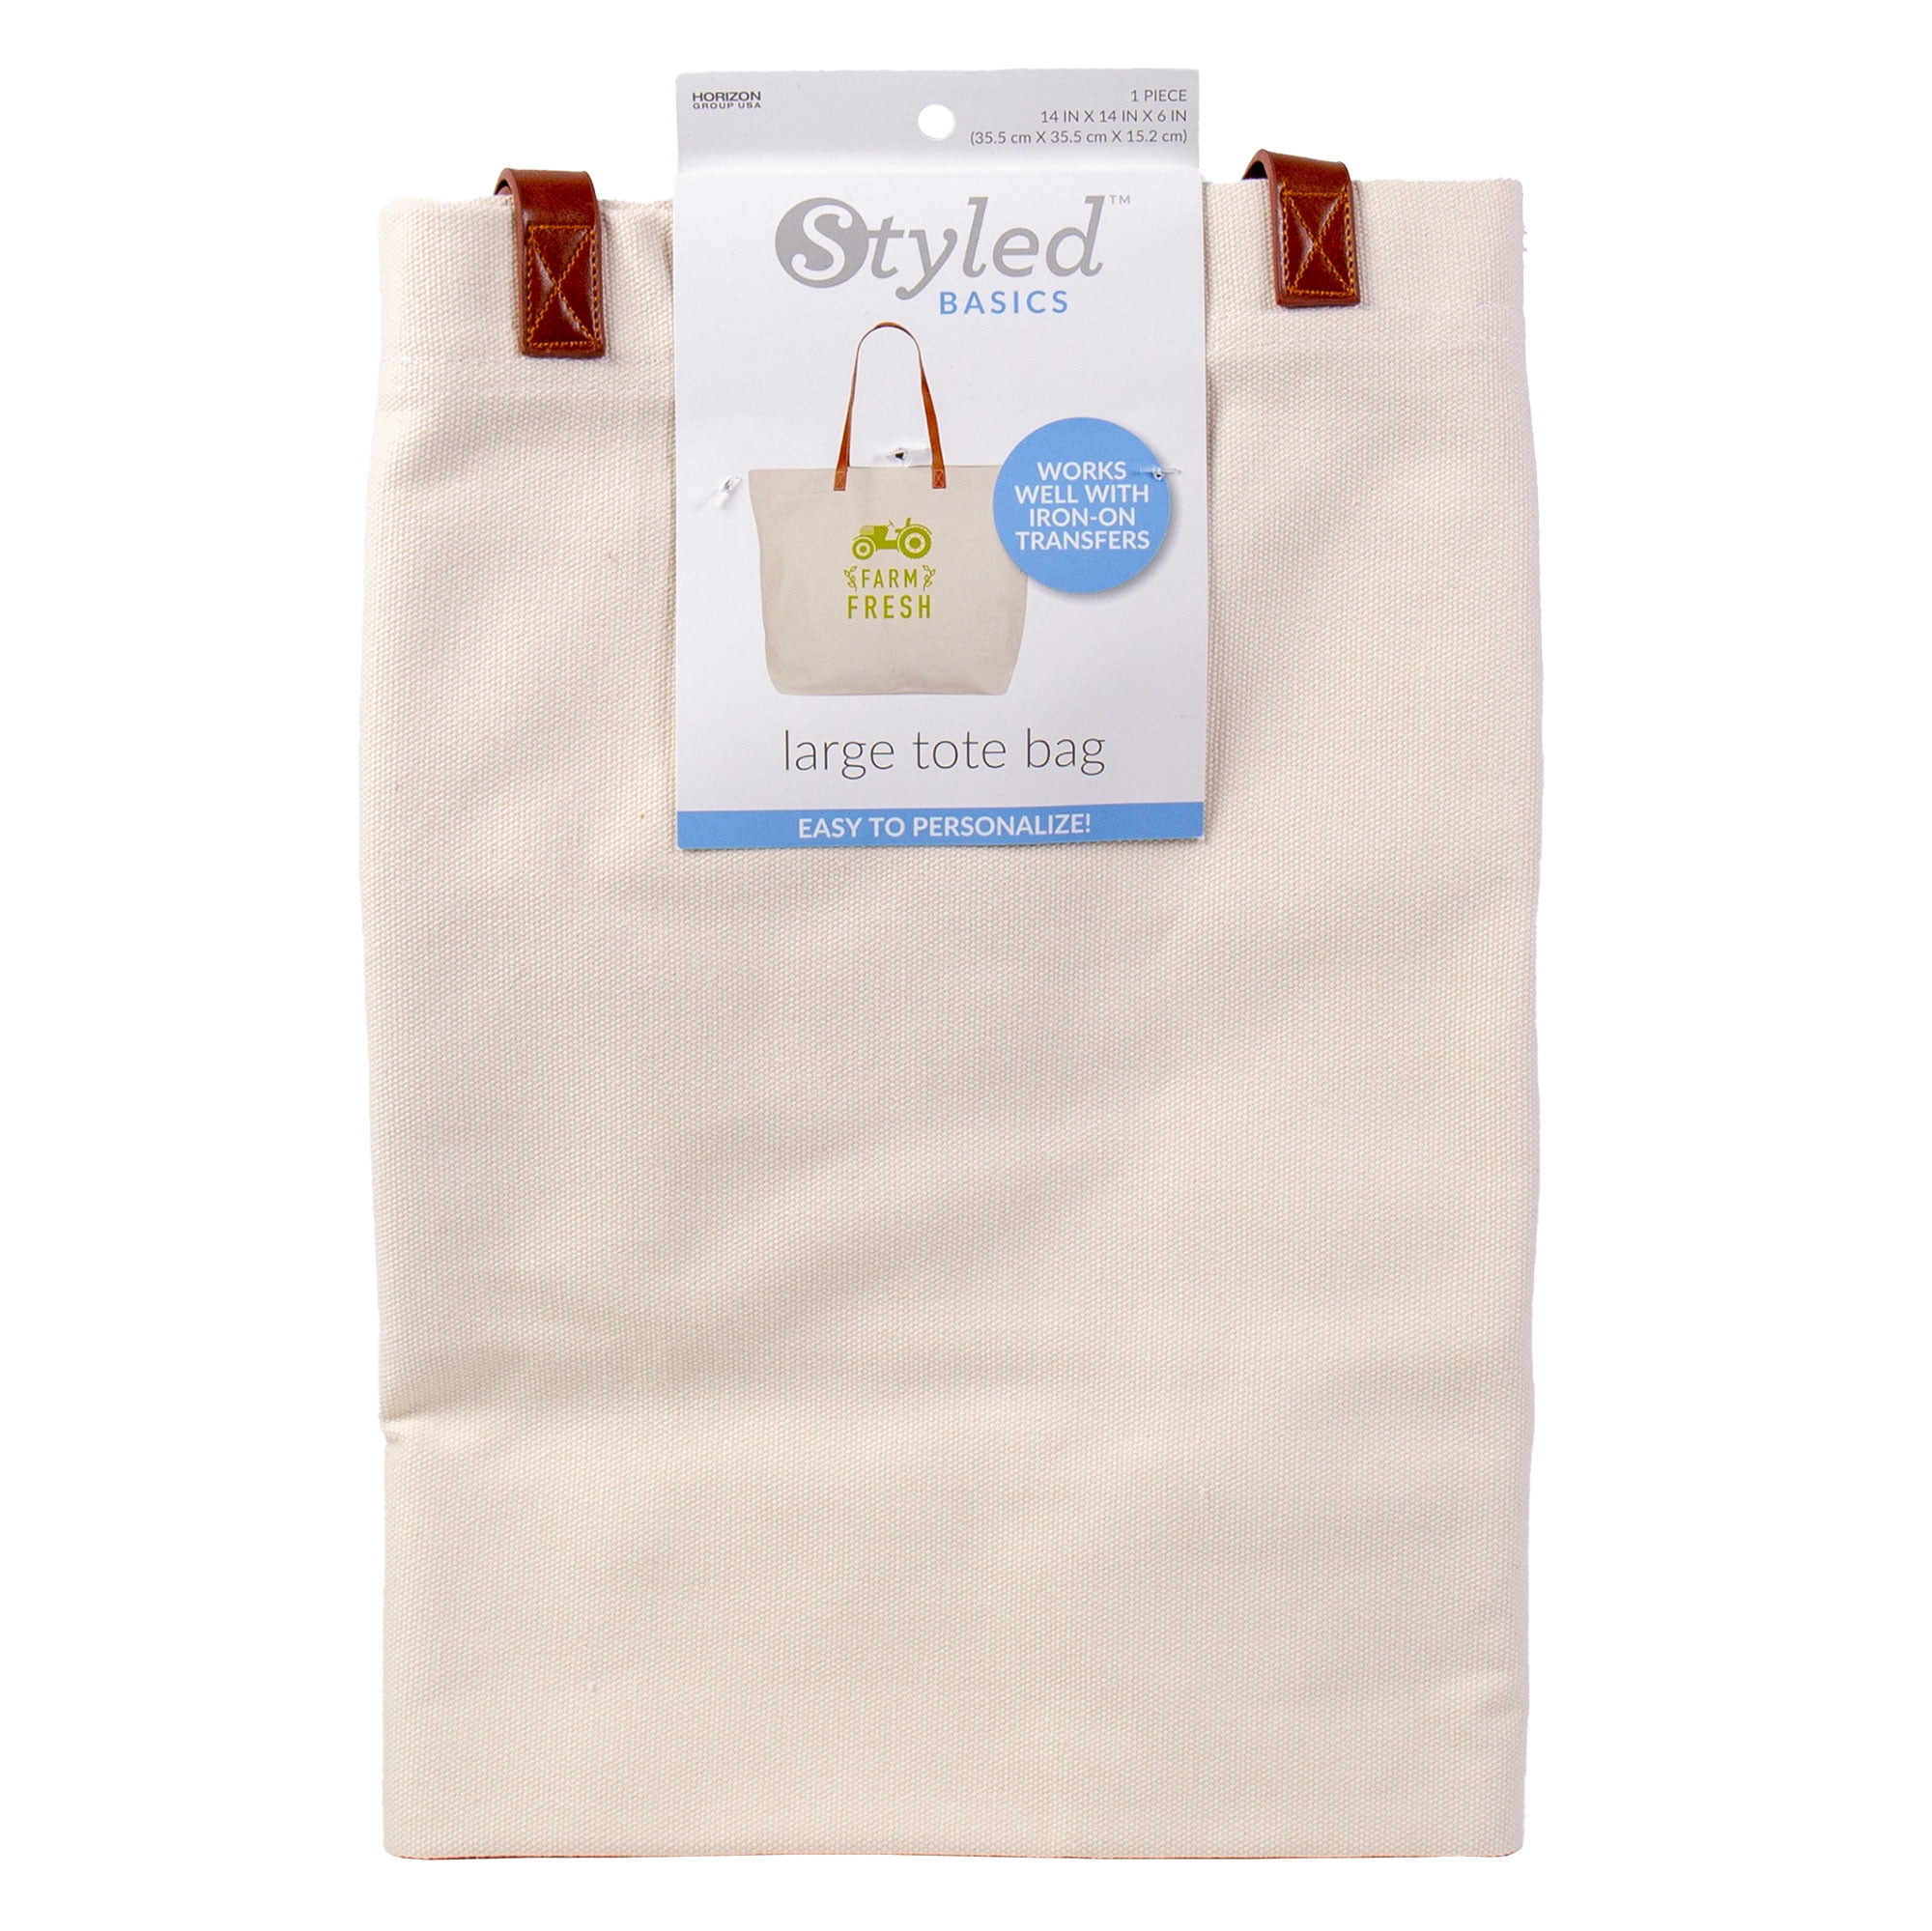 Reusable Grocery Travel Bag 100% Cotton Canvas Boat Tote Bag 